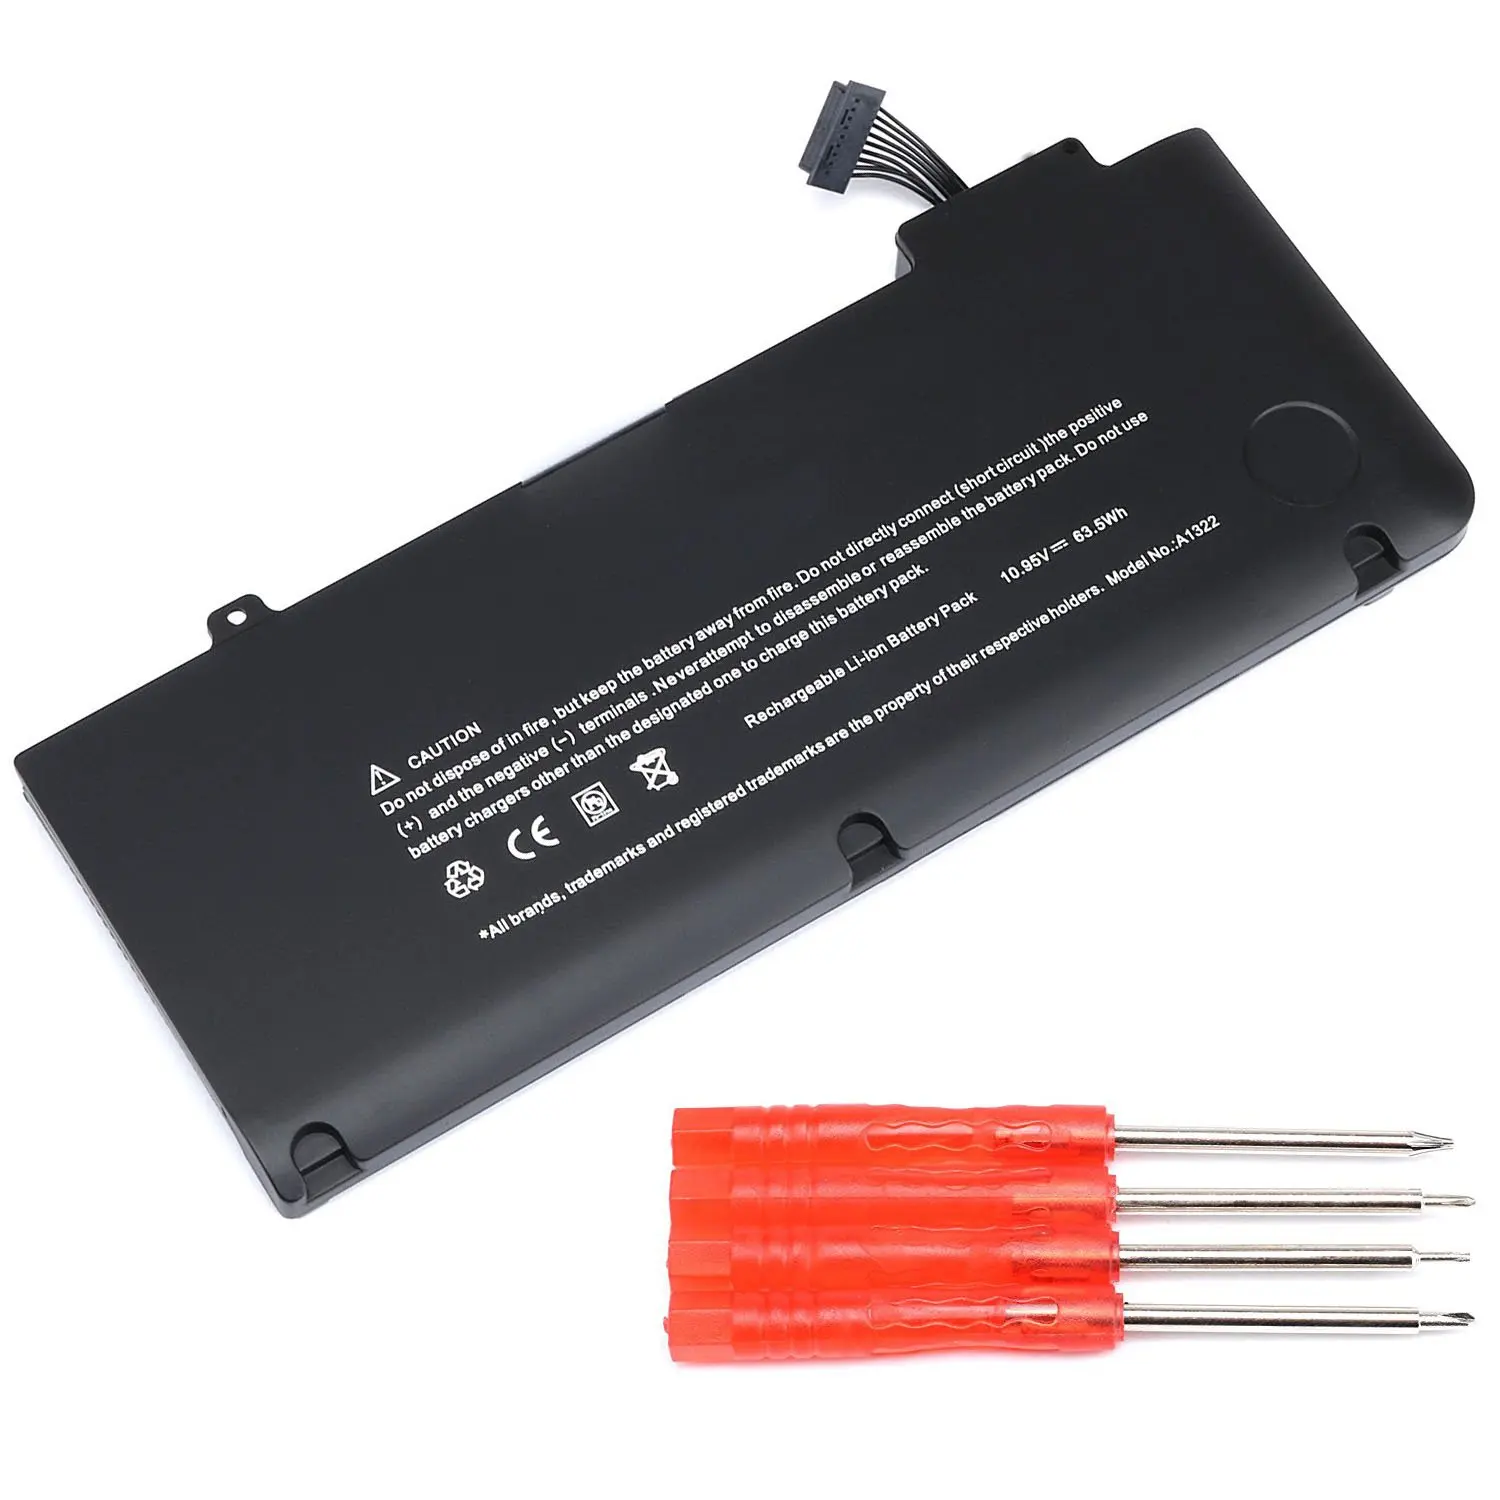 macbook pro 15 inch mid 2010 battery part number